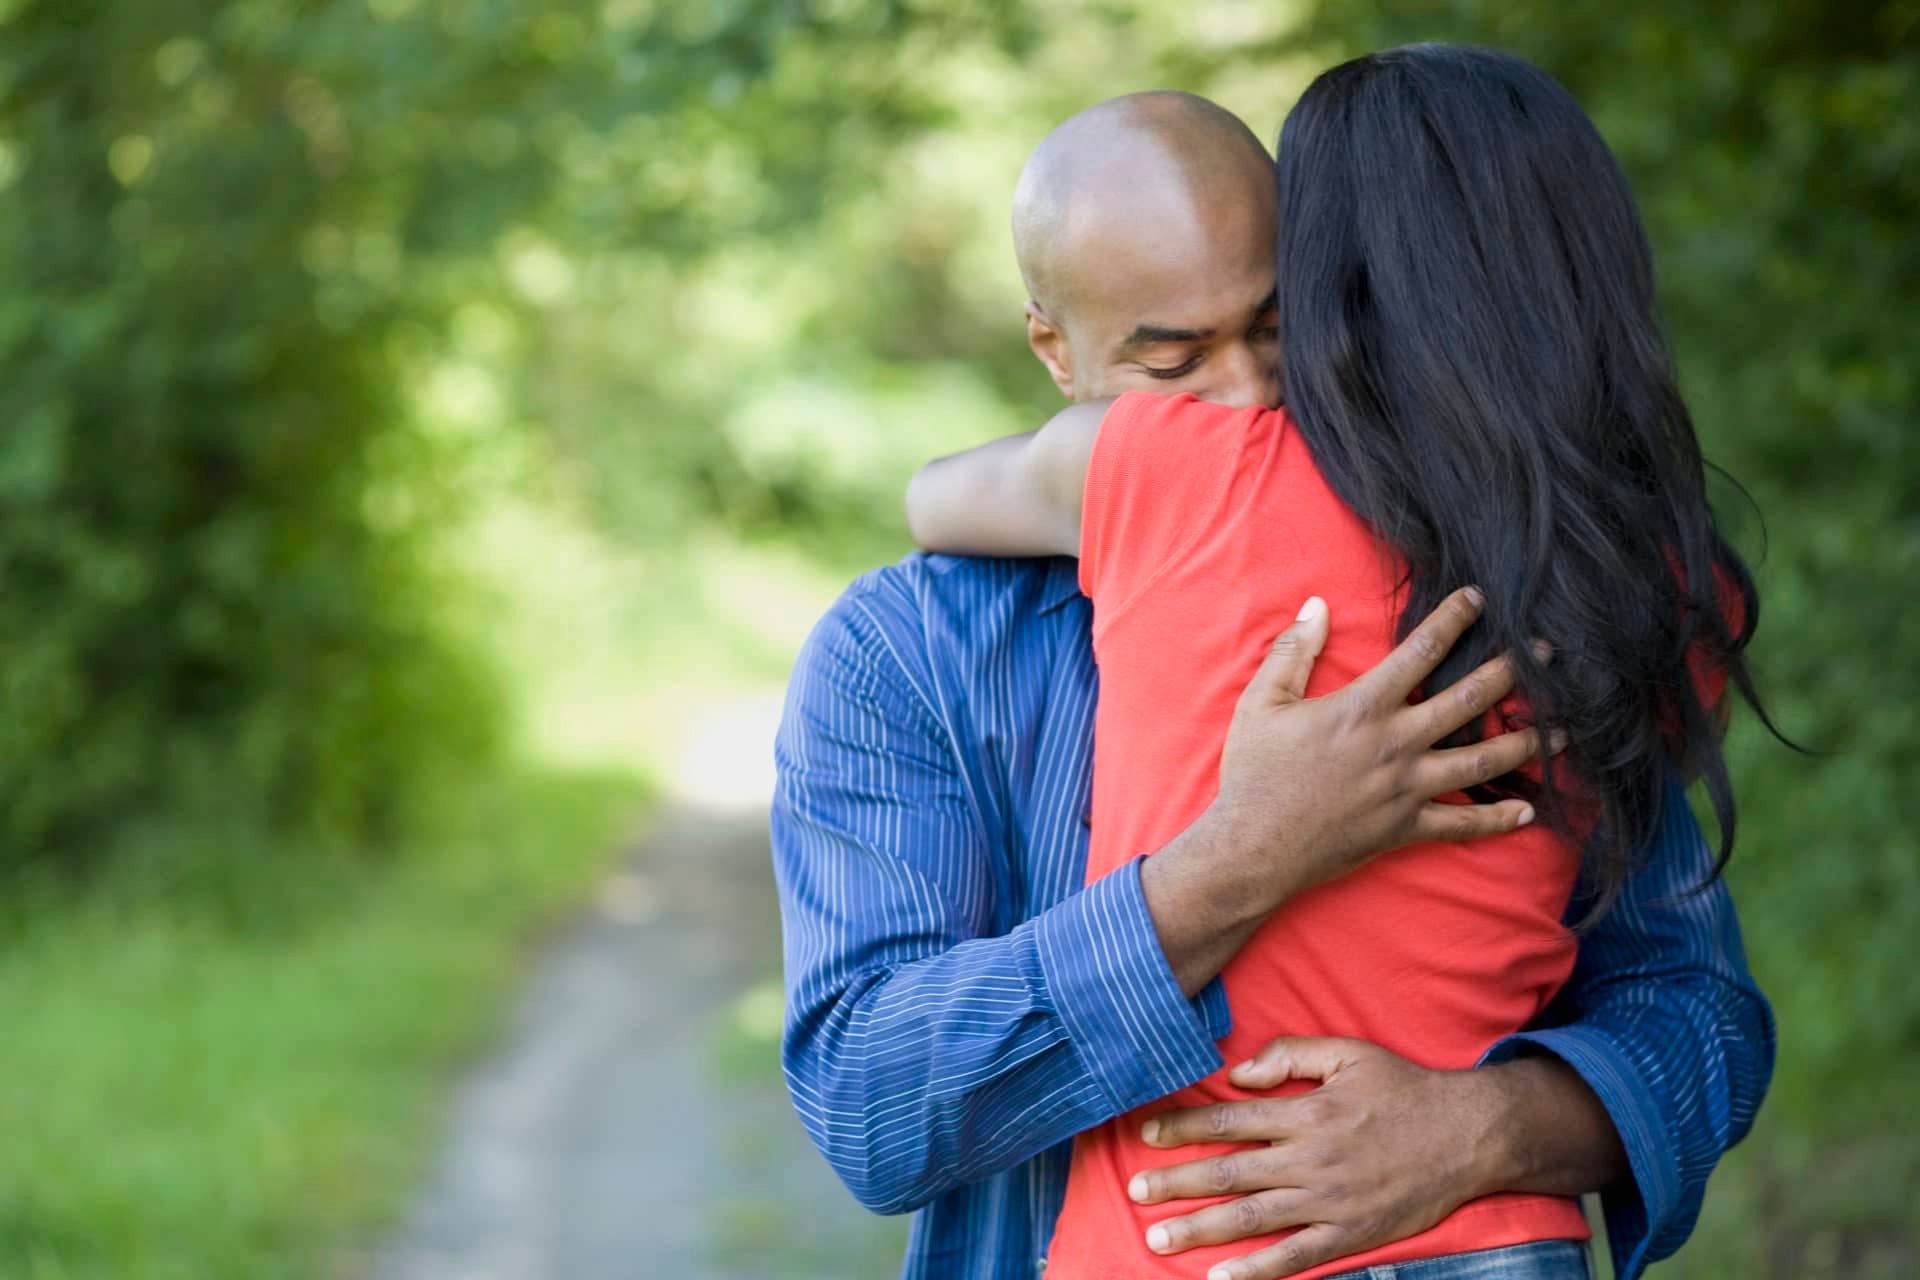 Is It Really Over? 9 Telltale Signs It's Time To Breakup and Move On For Good